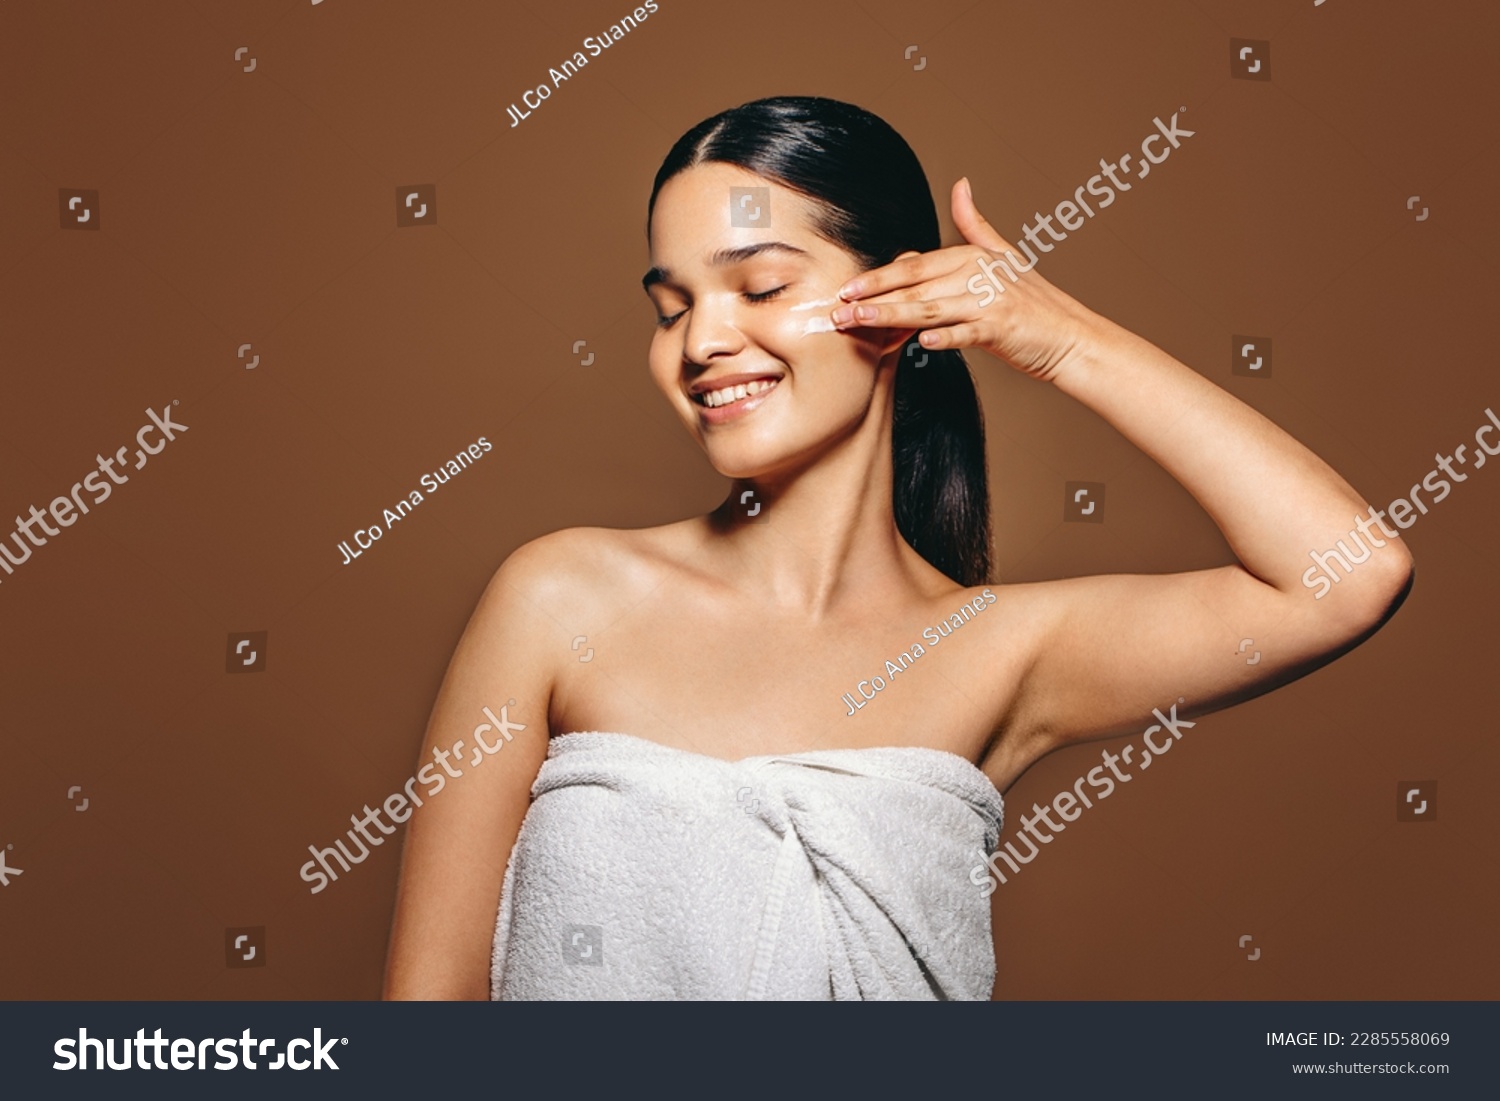 Female applying facial cream in a studio. Beautiful Hispanic woman pampering her skin using moisturizing lotion, enjoying practicing a healthy skincare routine for a radiant complexion. #2285558069